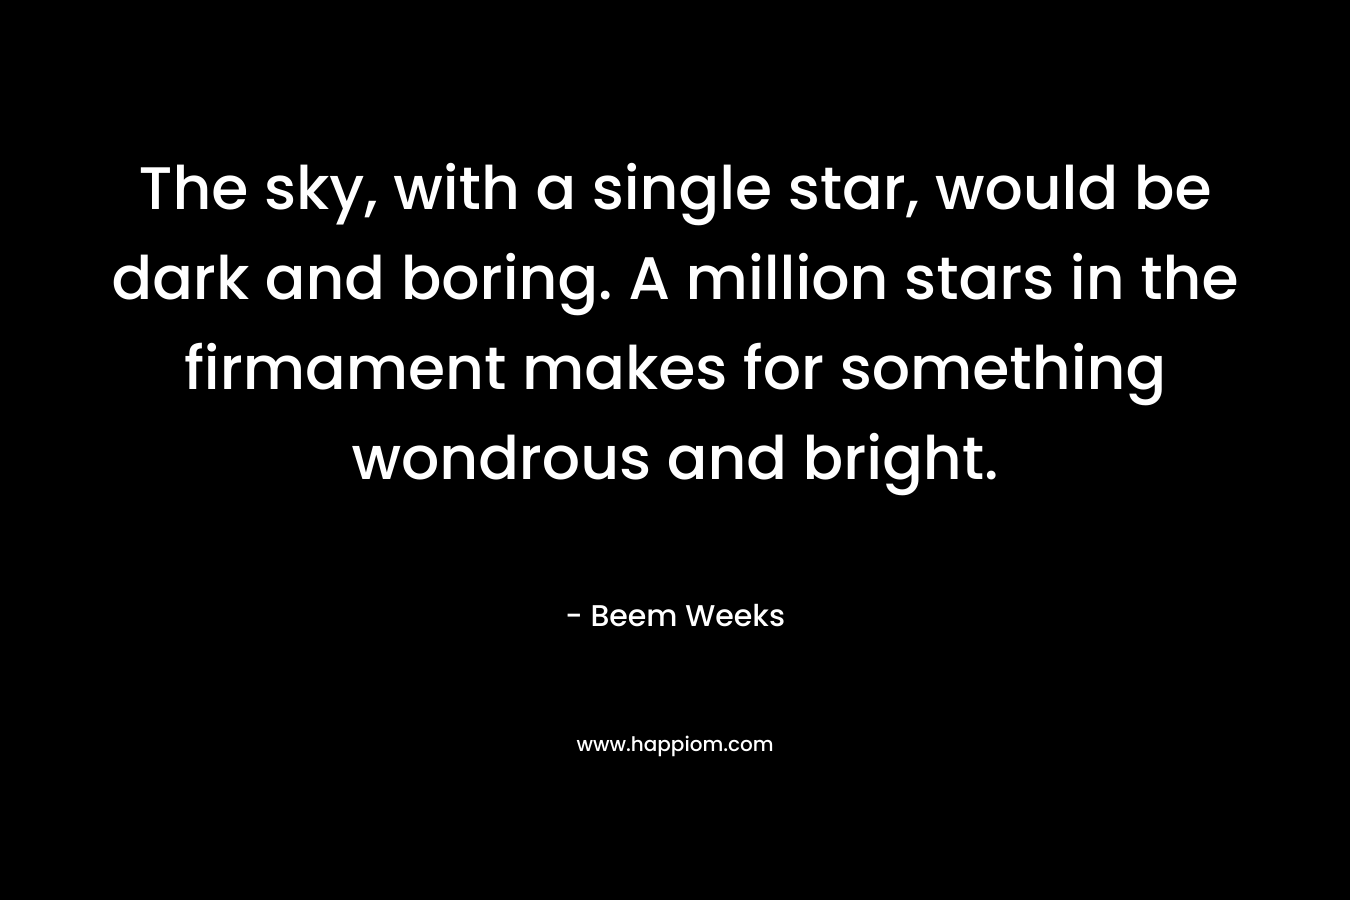 The sky, with a single star, would be dark and boring. A million stars in the firmament makes for something wondrous and bright. – Beem Weeks